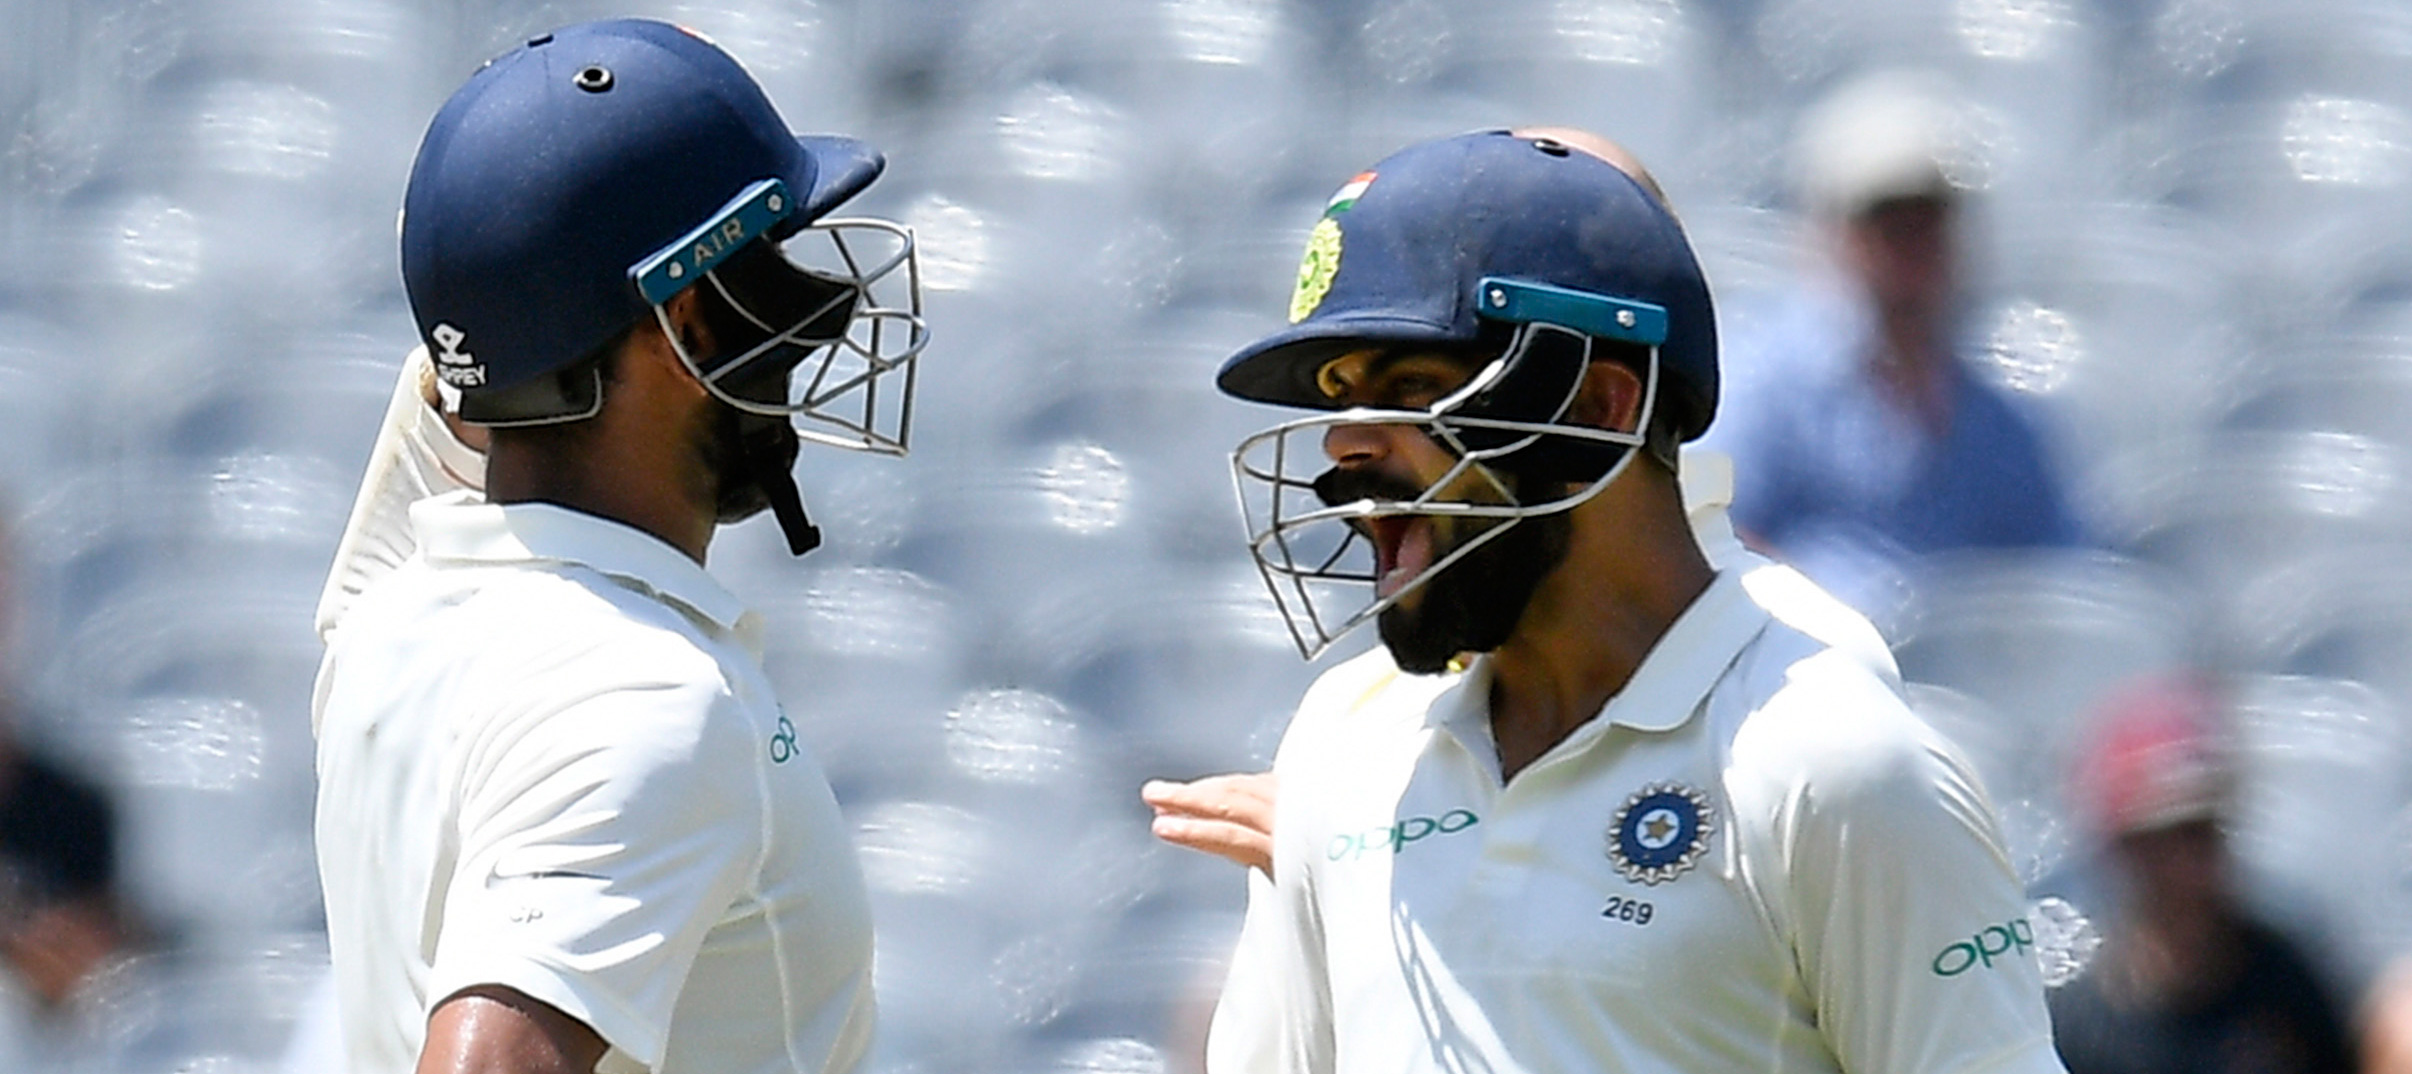 India's Virat Kohli, right, reacts after team mate Cheteshwar Pujara, left scores a century during play on day two of the third cricket test between India and Australia in Melbourne, Australia on Thursday, December 27, 2018.